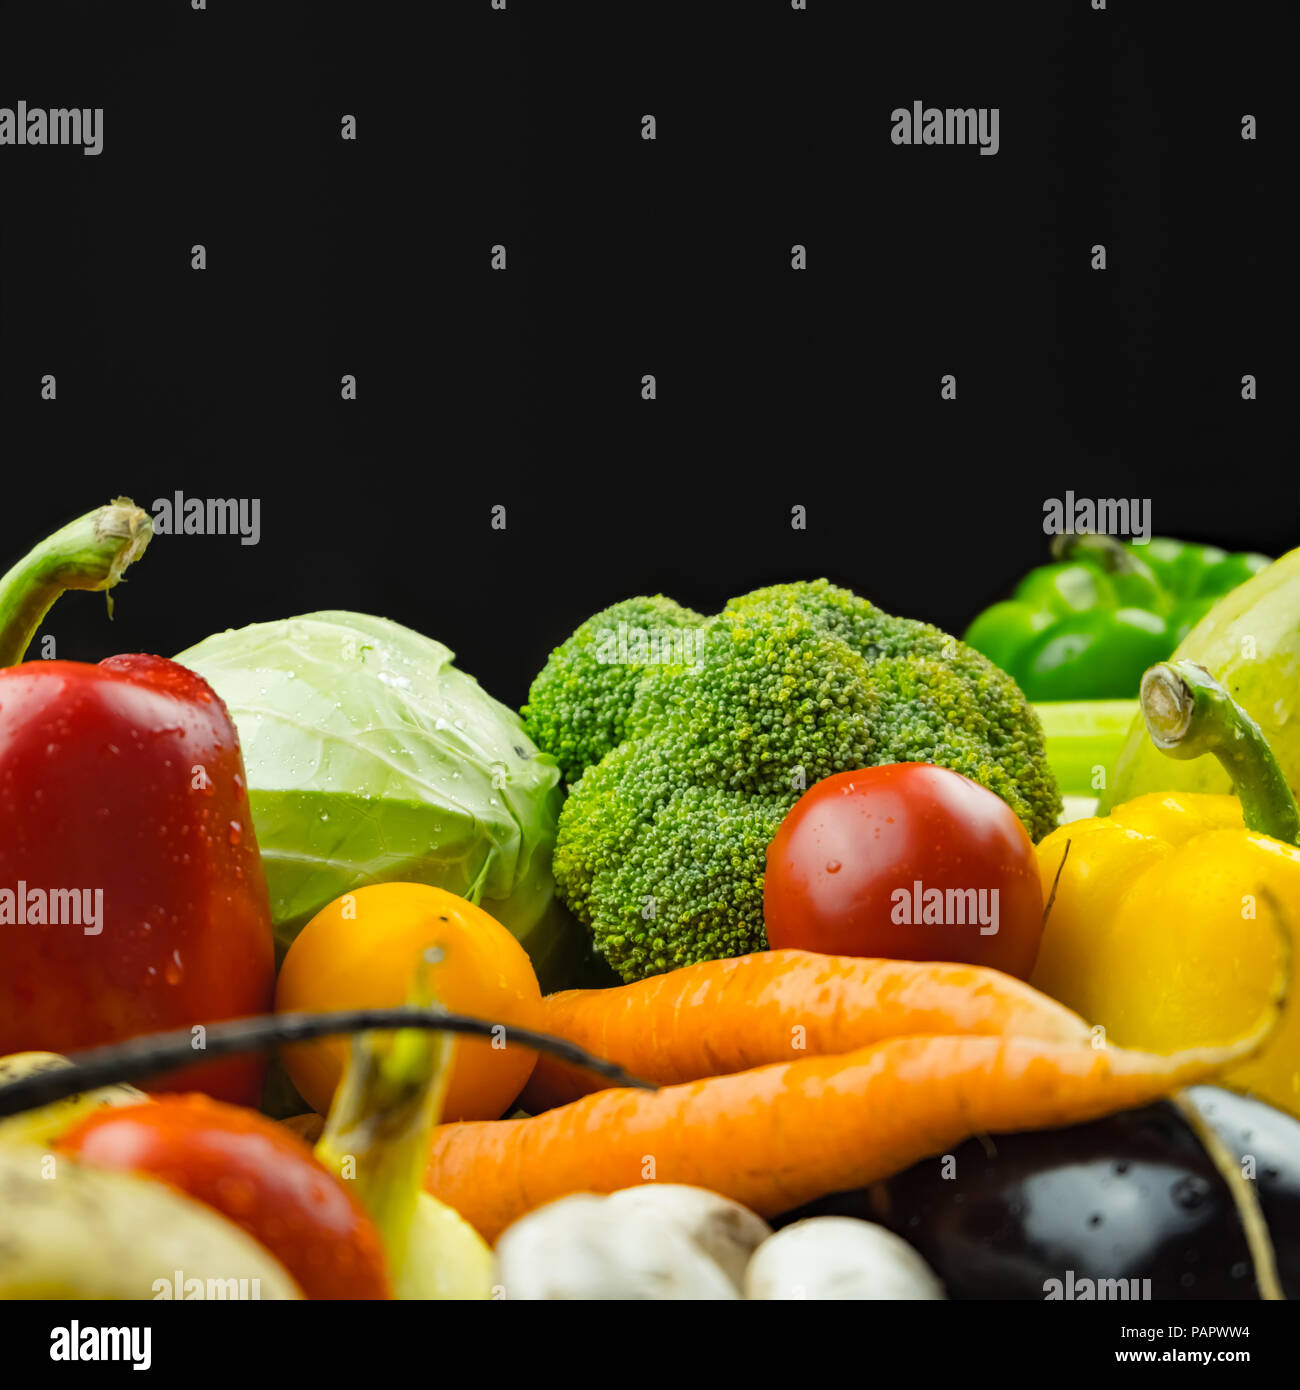 Close-up image of fresh organic vegetables, copy space composition. Locally grown bell pepper, corn, carrot, mushrooms and other natural vegan food la Stock Photo